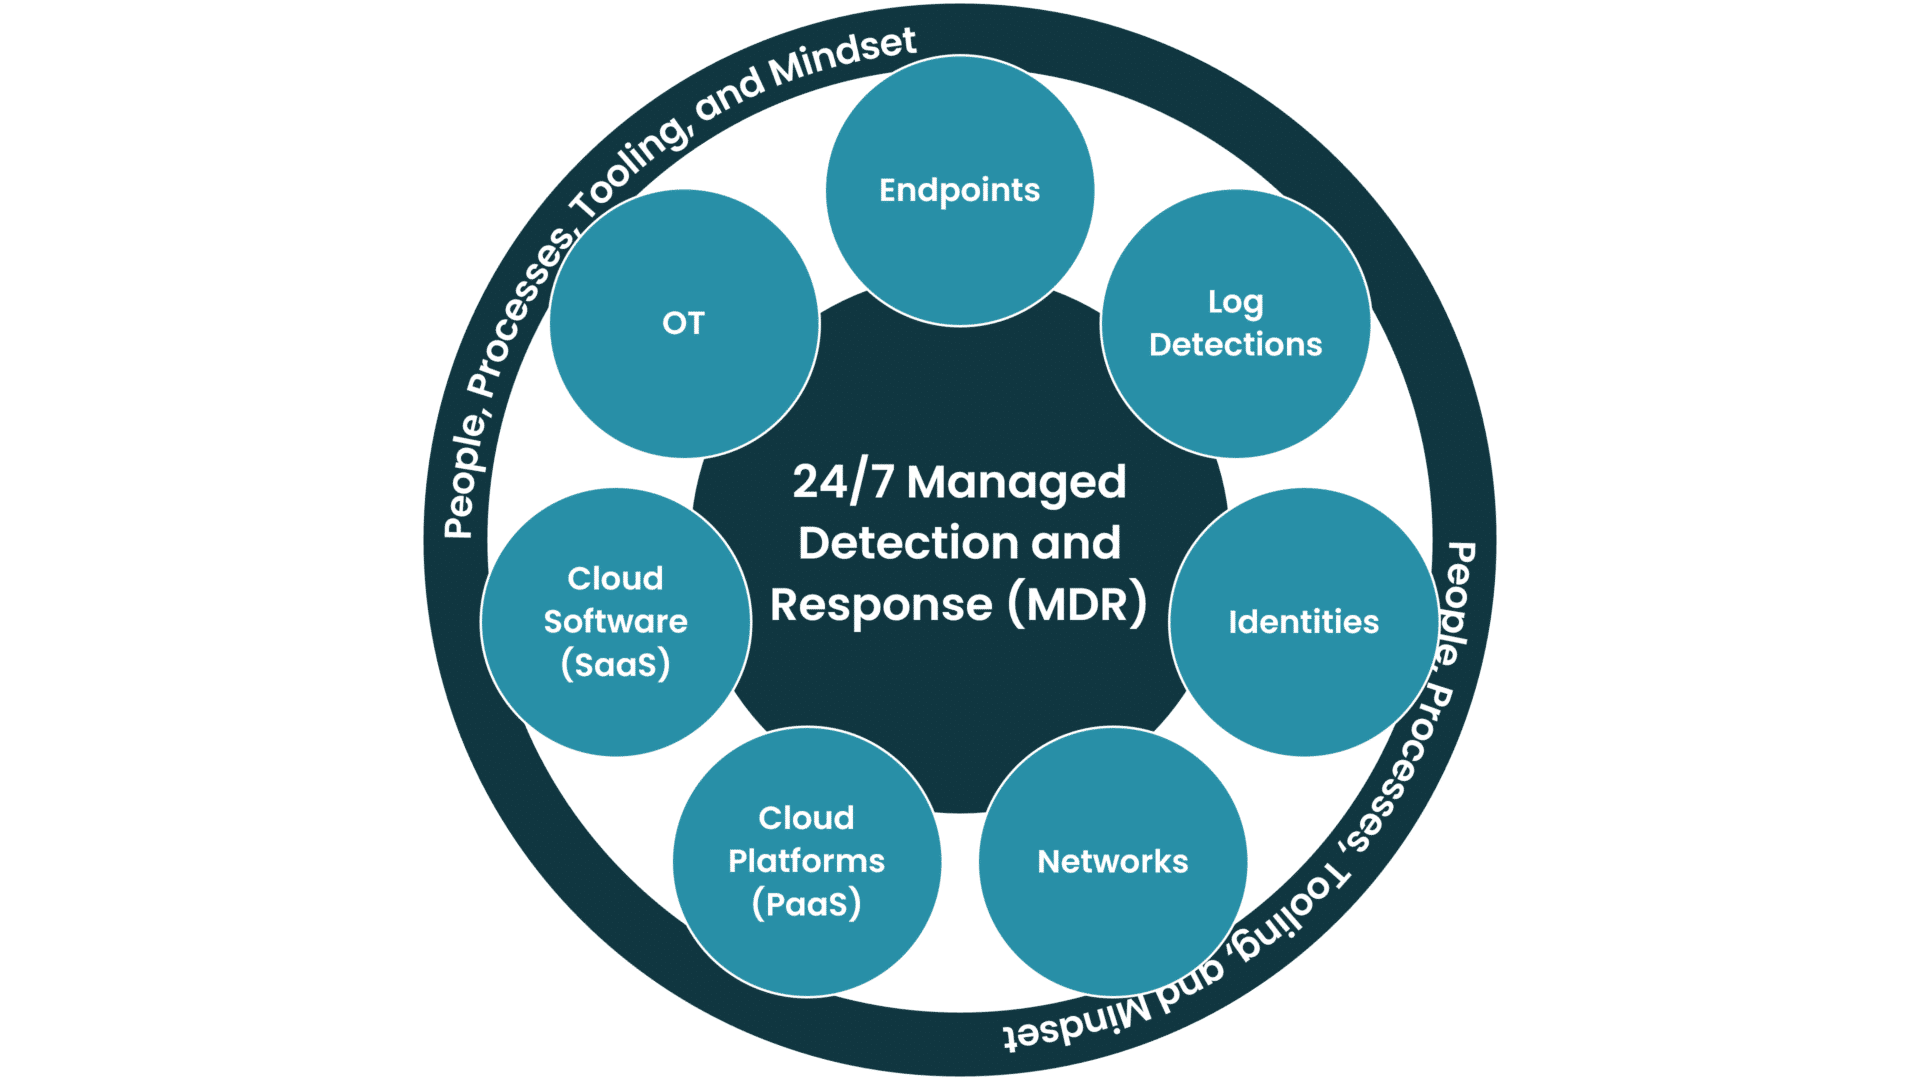 Illustration with the 24/7 managed detection and response service in the middle, and seven available modules (they are: Endpoints, Log Detection, Identities, Networks, Cloud Platforms (PaaS), Cloud Software (SaaS), and OT). And enclosing them all are a circle with "People, Processes, Tooling and Mindset".